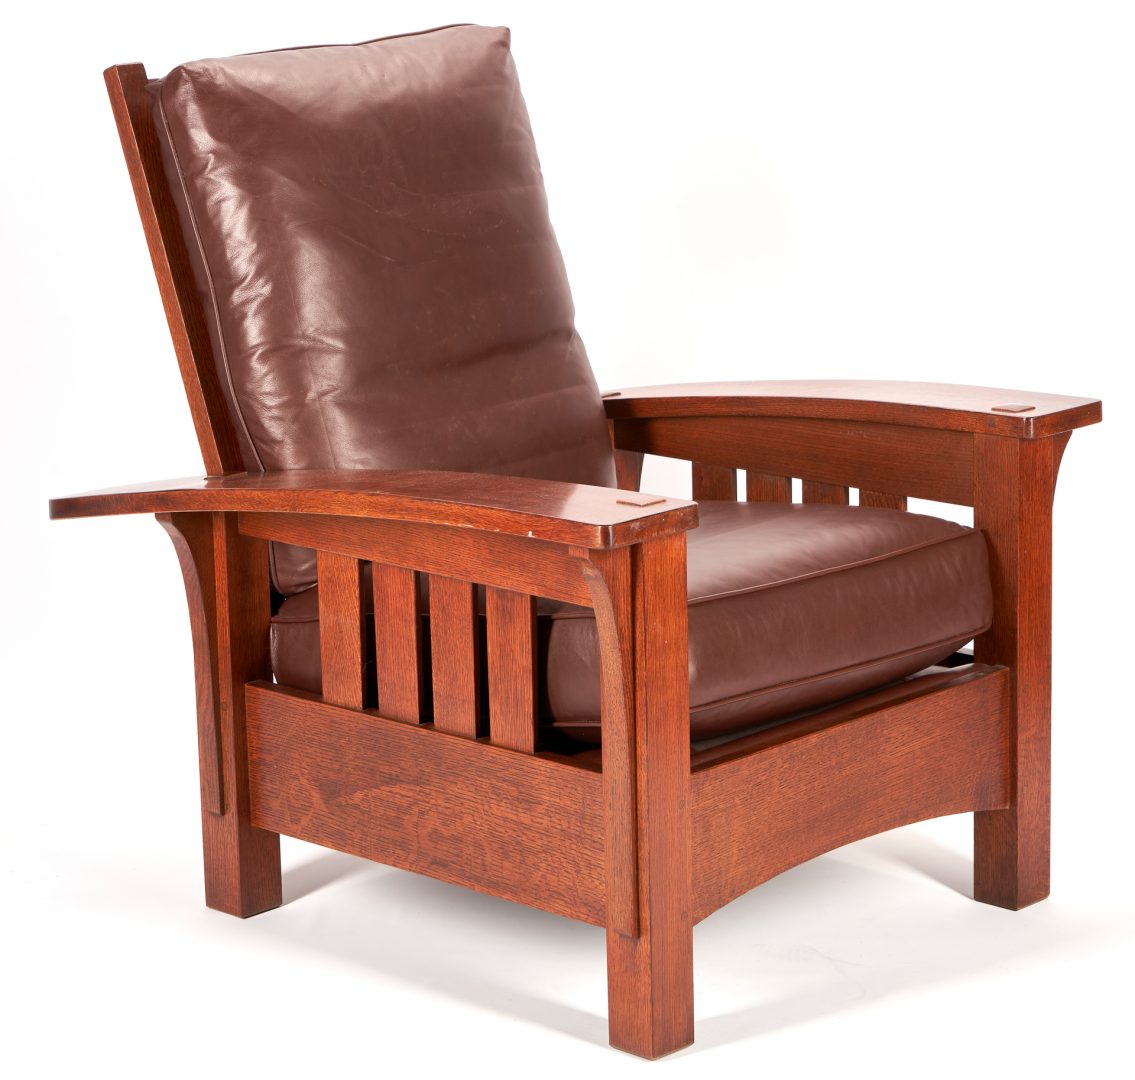 Lot 568: Mission Stickley Furniture Incl. Arm Chair, Footstool, & Magazine Rack, Three (3) Items